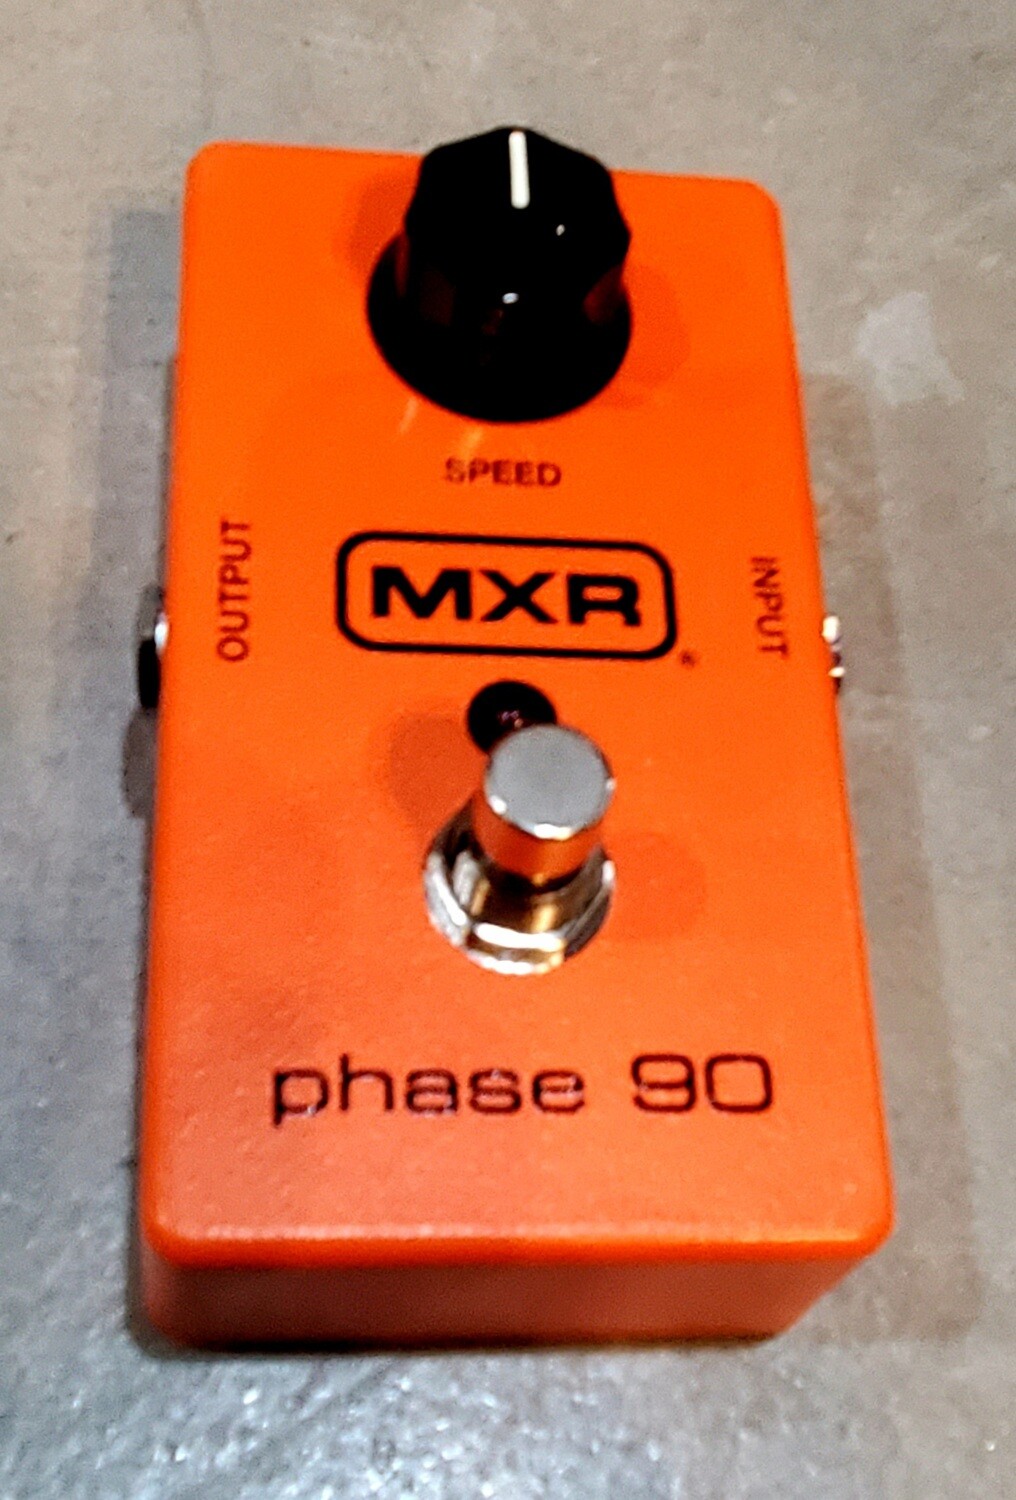 MXR Phase 90 Effects Pedal